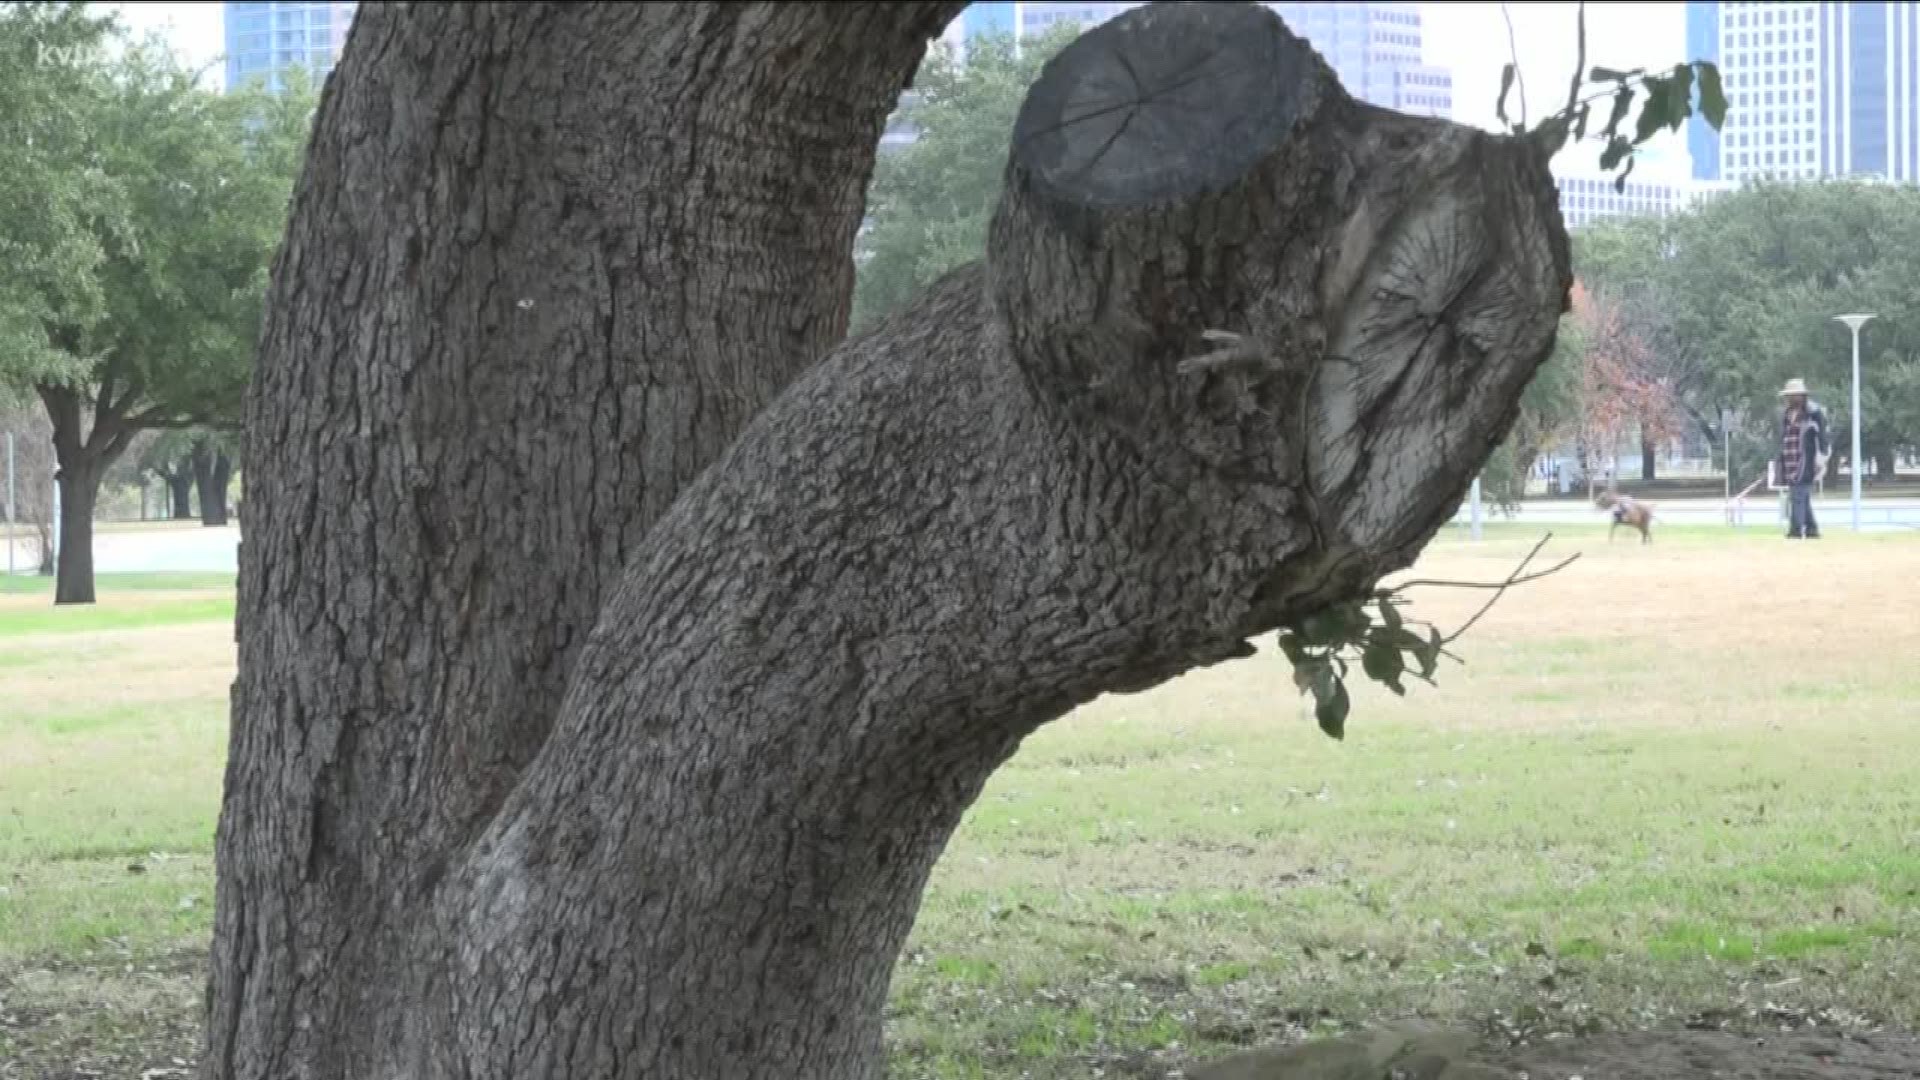 Protecting and preserving historic trees is not a new issue for Austin.